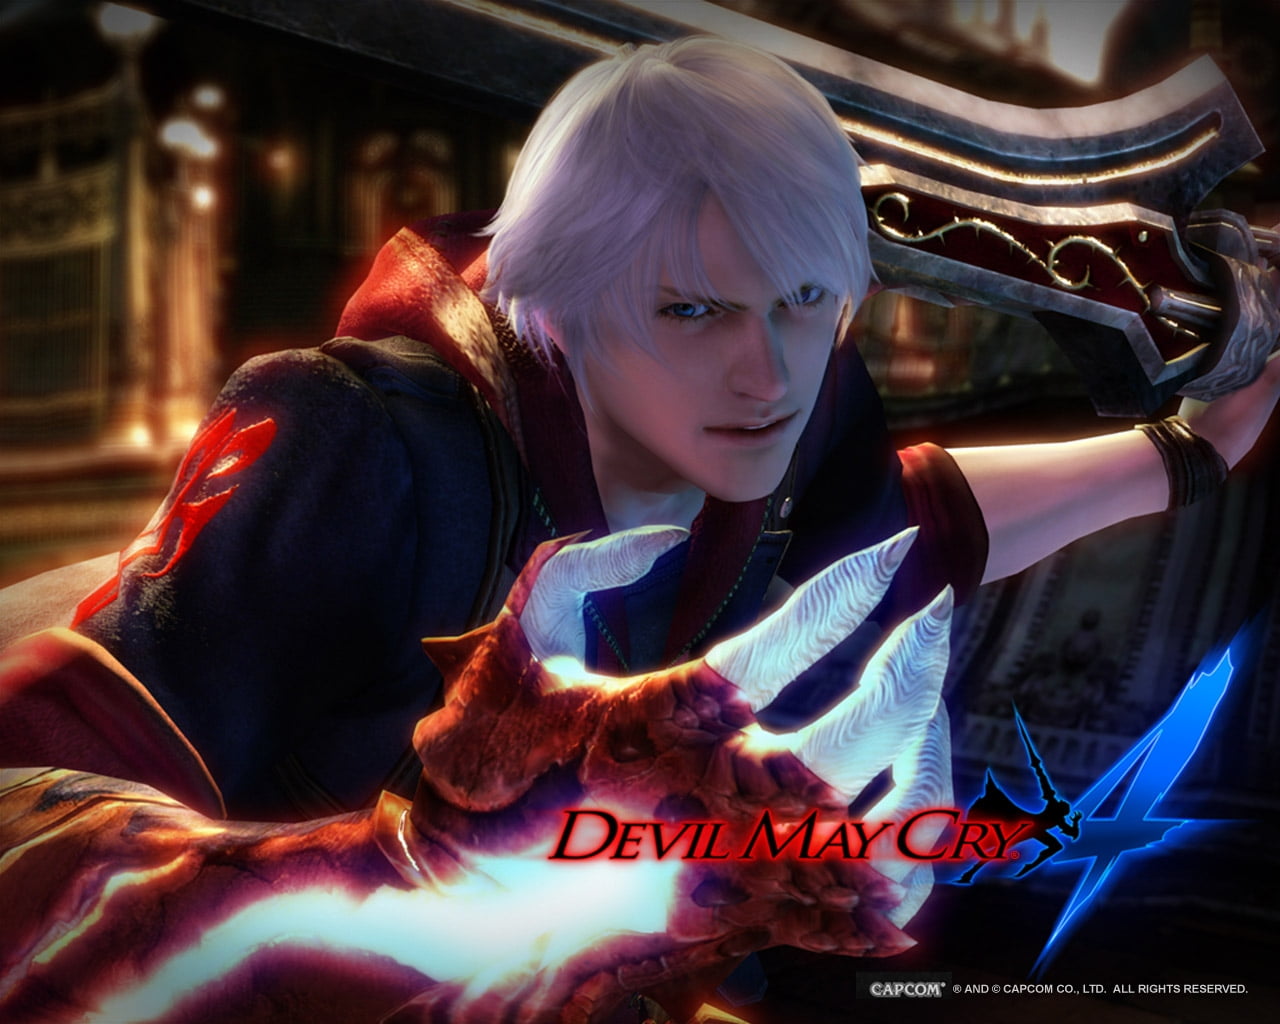 Dante Devil May Cry anime character